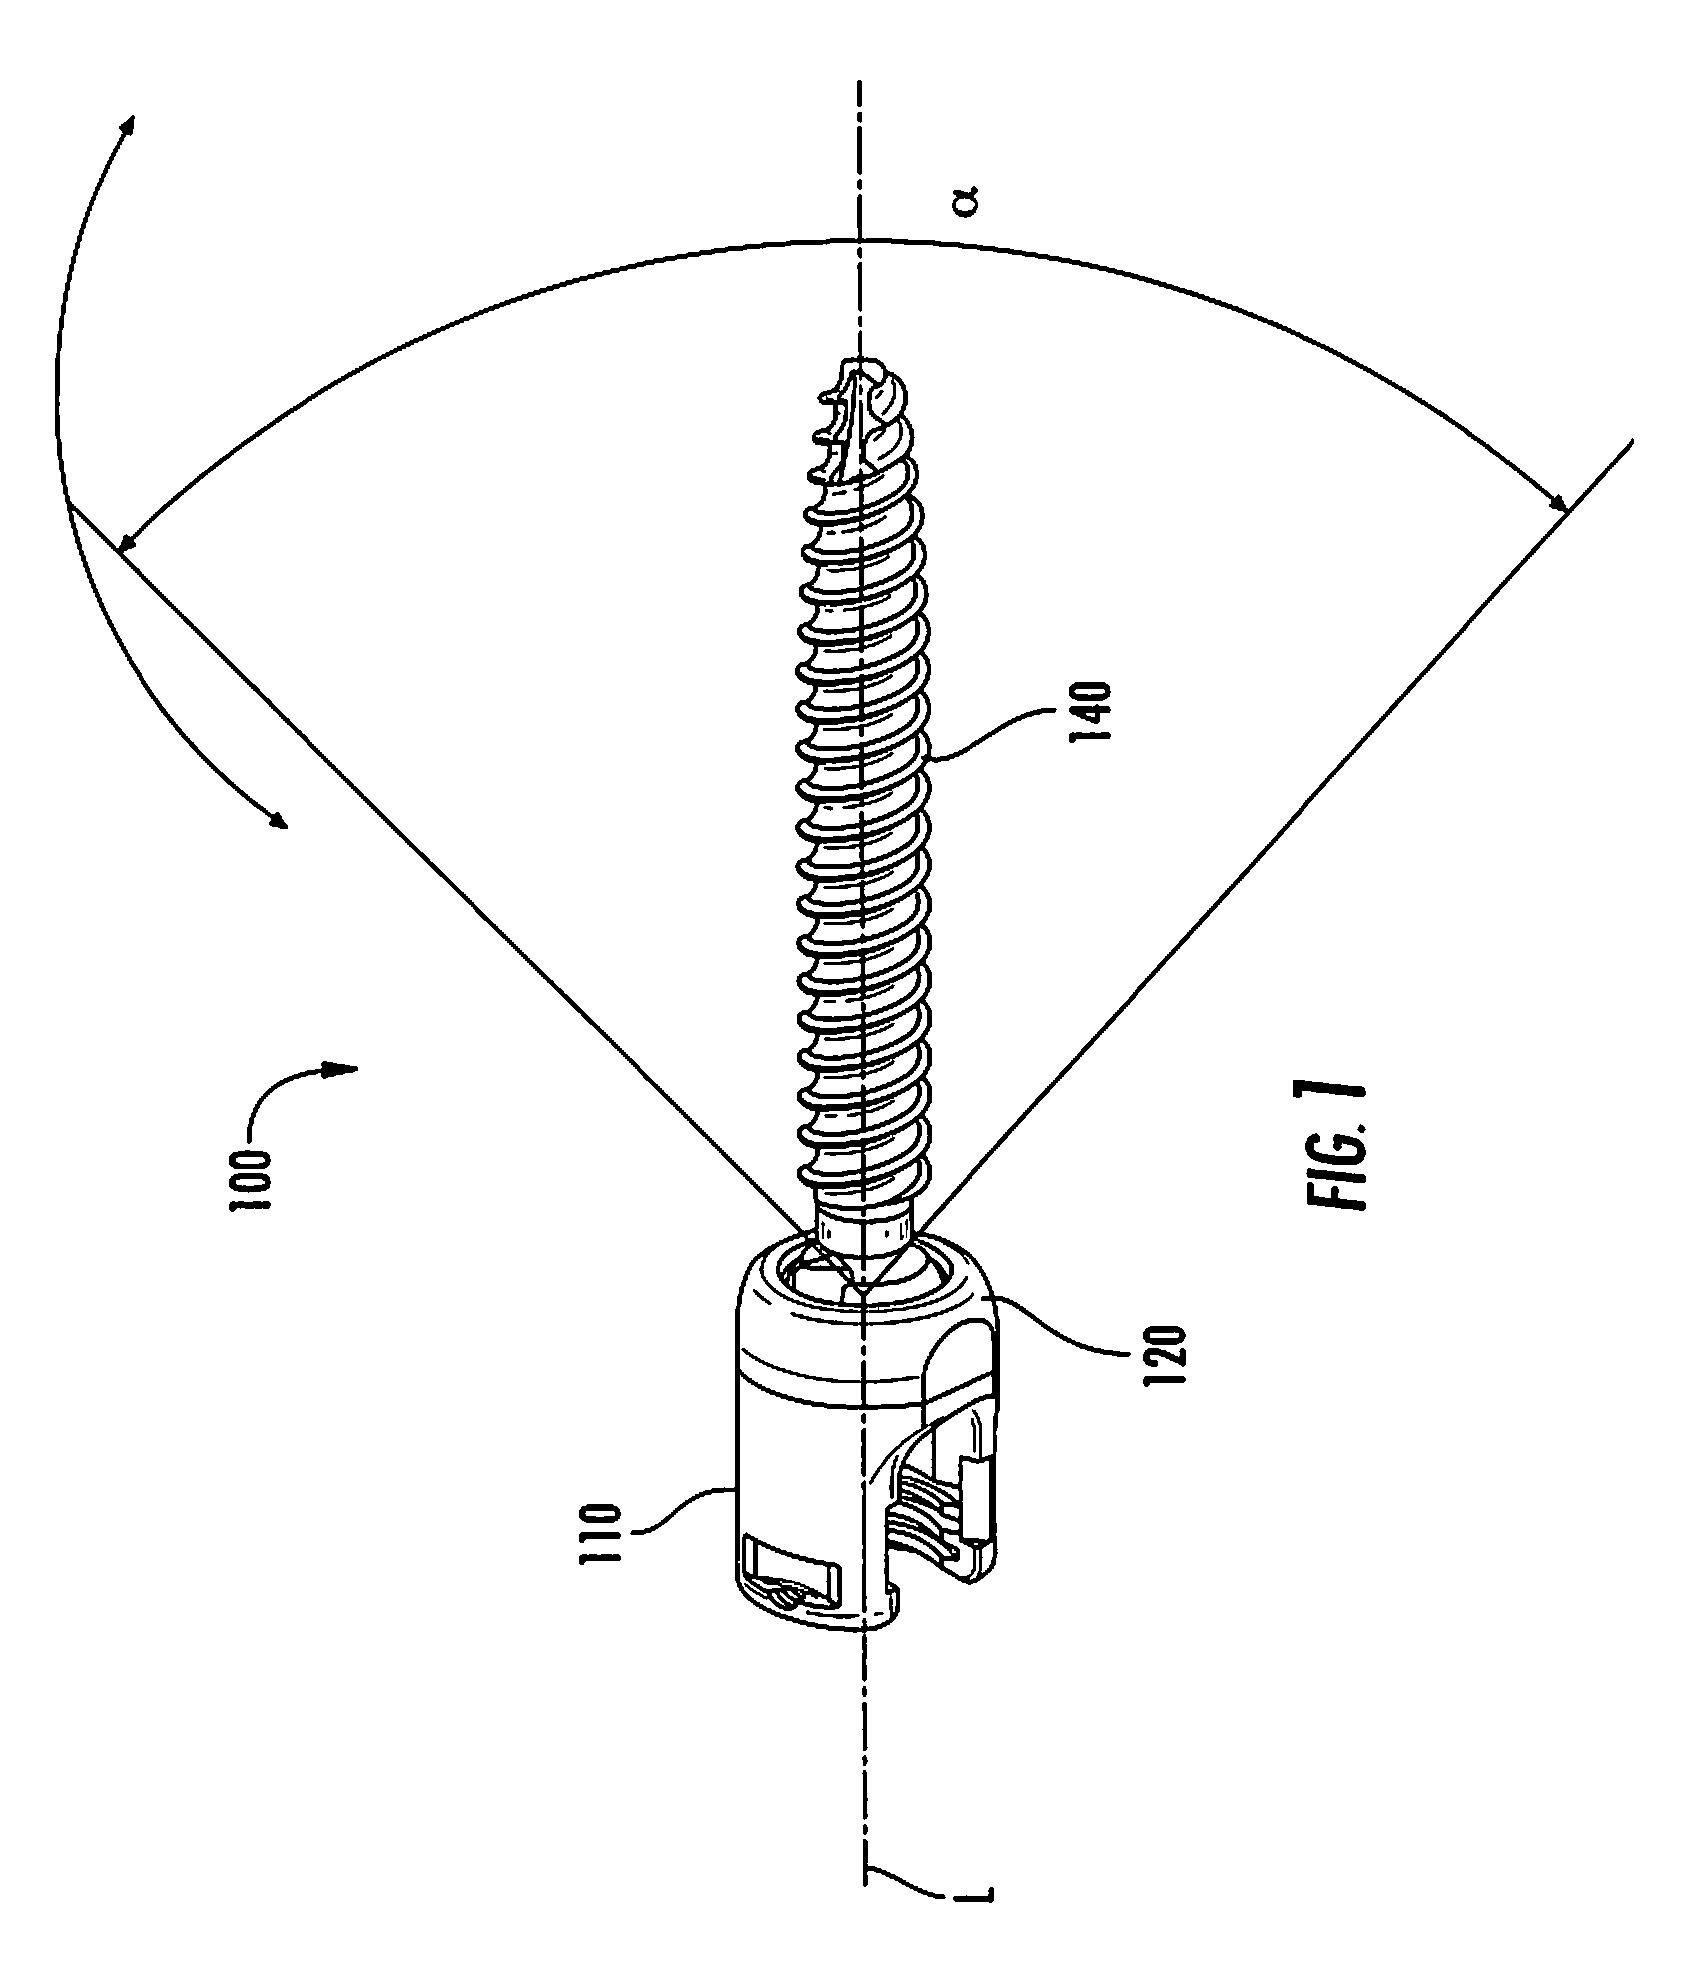 Spinal fixation system